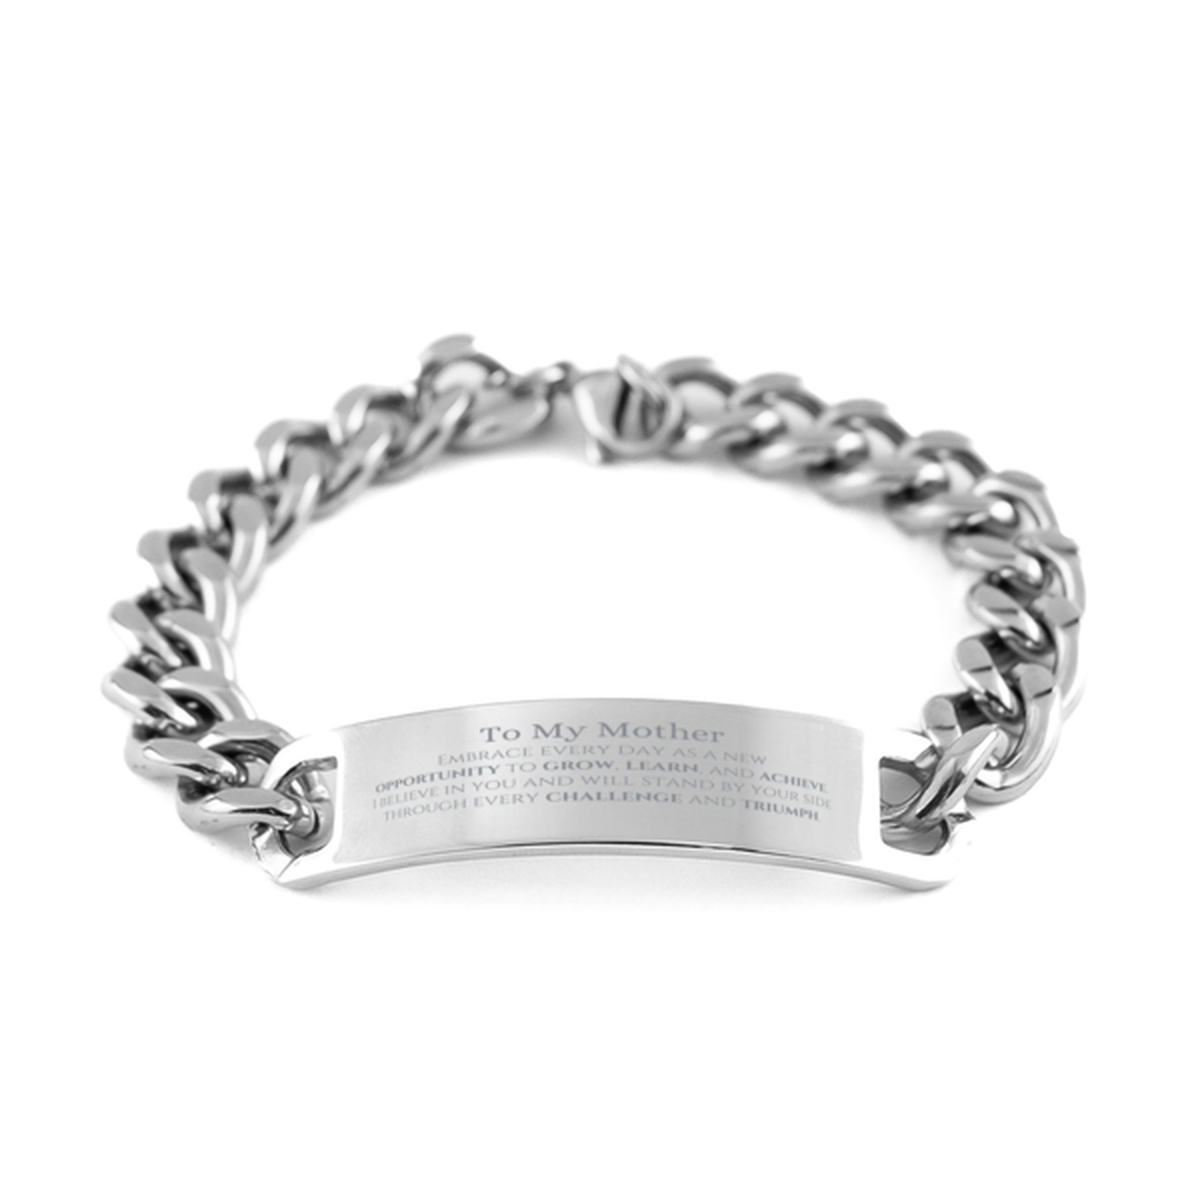 To My Mother Gifts, I believe in you and will stand by your side, Inspirational Cuban Chain Stainless Steel Bracelet For Mother, Birthday Christmas Motivational Mother Gifts